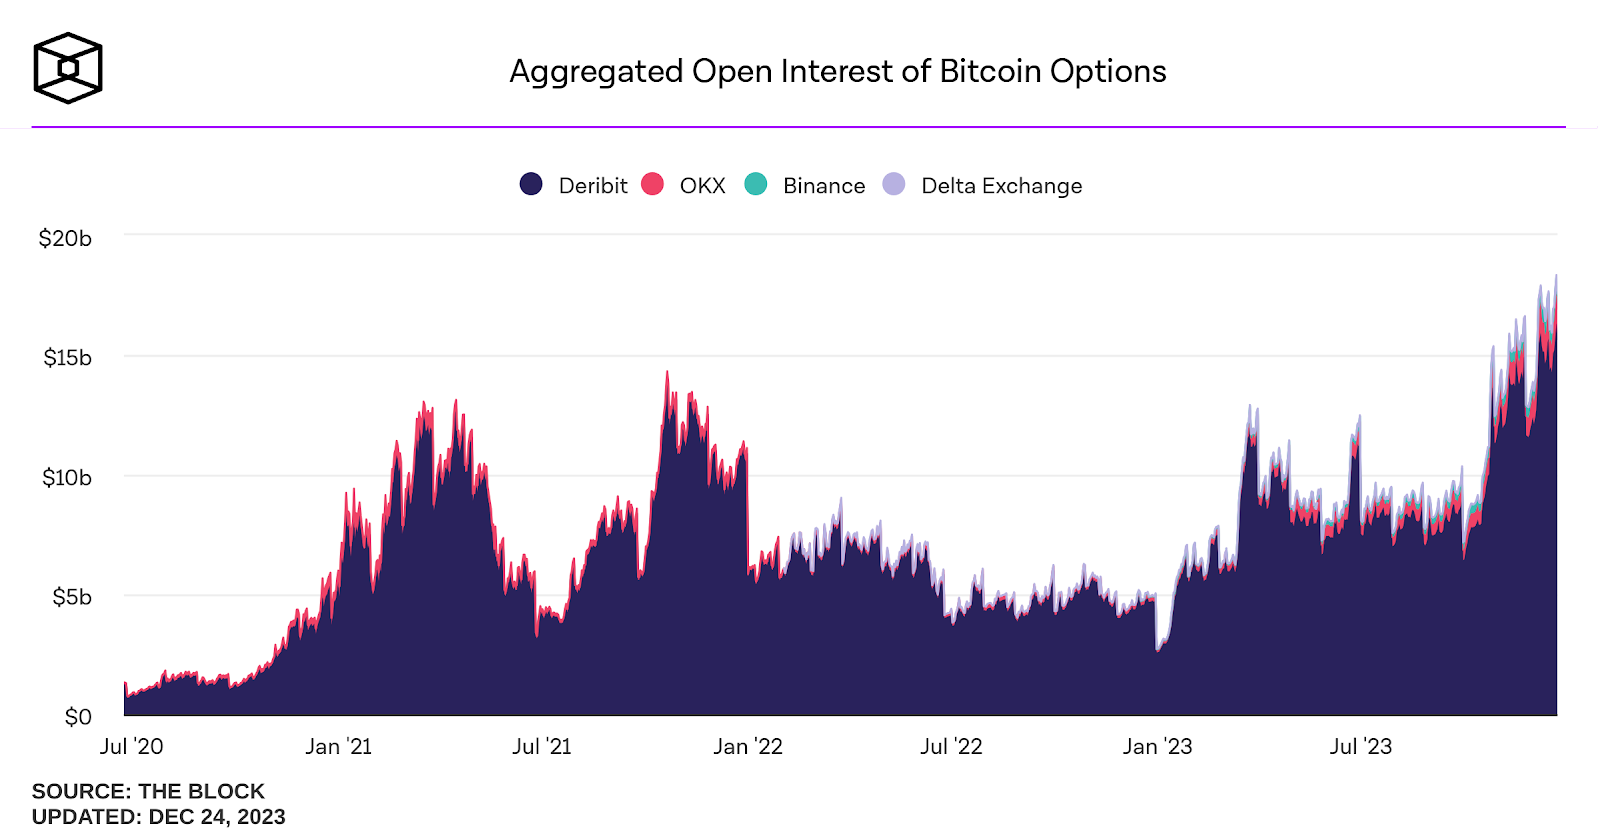 Bitcoin Options Open Interest Skyrockets Past $18 Billion as Traders Anticipate SEC ETF Decision